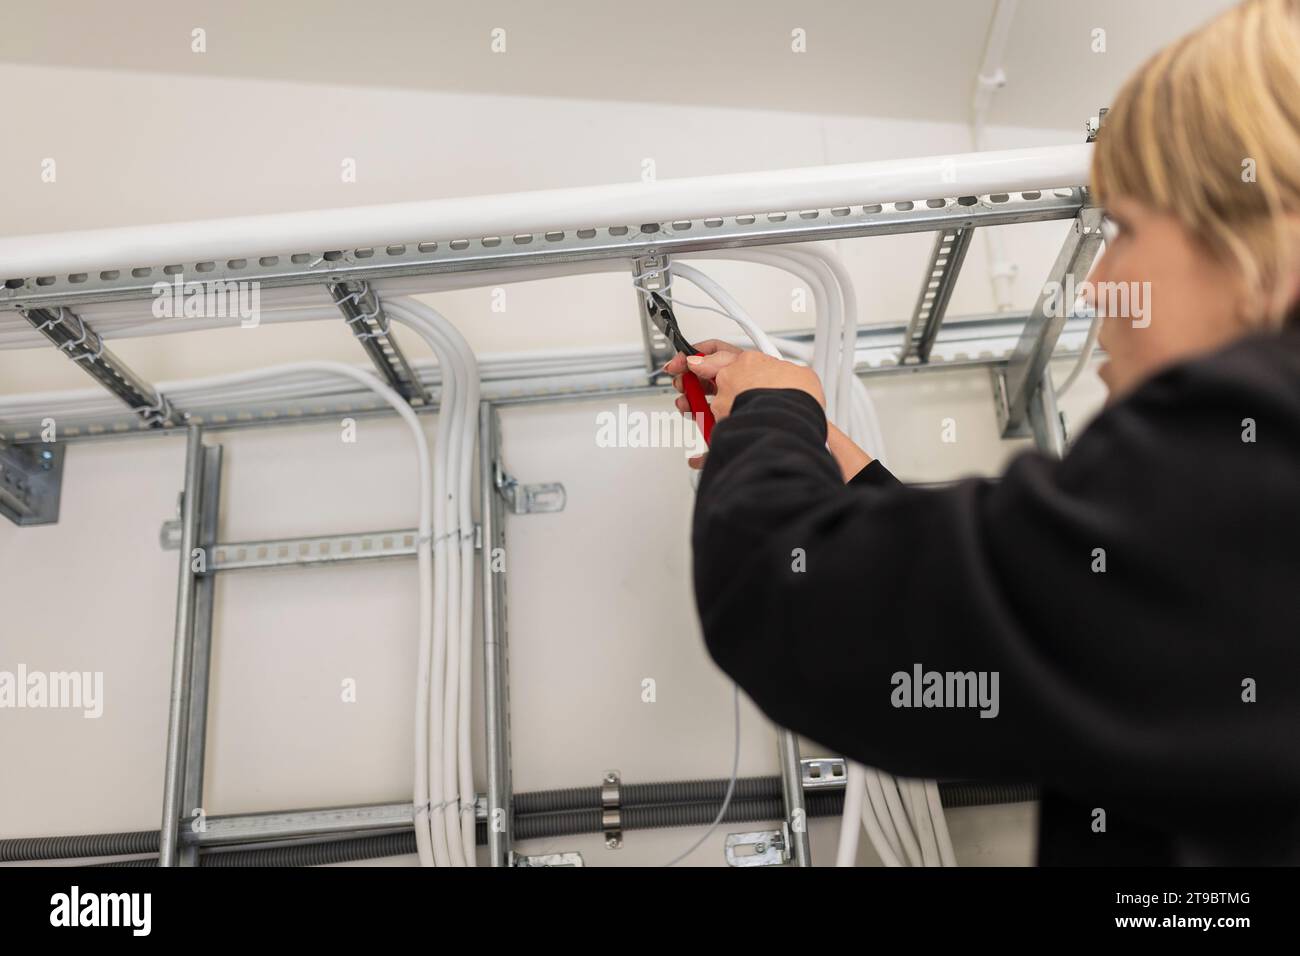 Female technician installing cables in industry Stock Photo